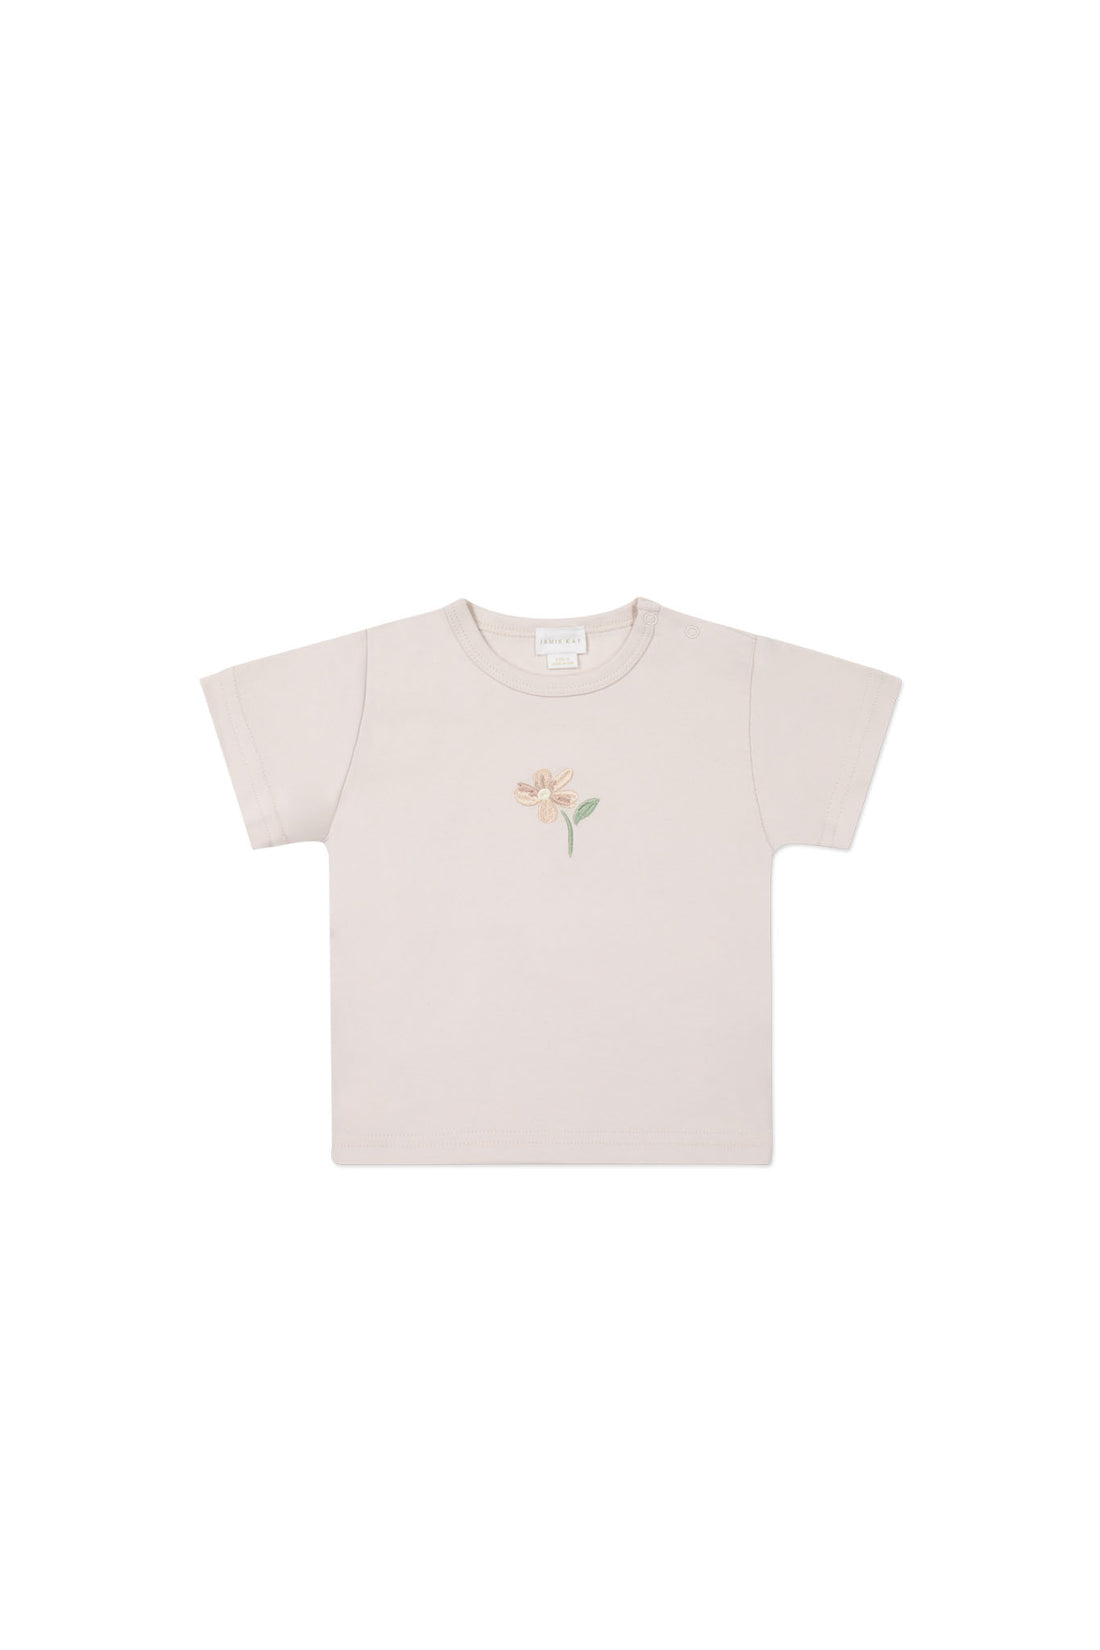 Pima Cotton Aude Oversized Tee - Rosewater Petite Goldie Childrens Top from Jamie Kay NZ